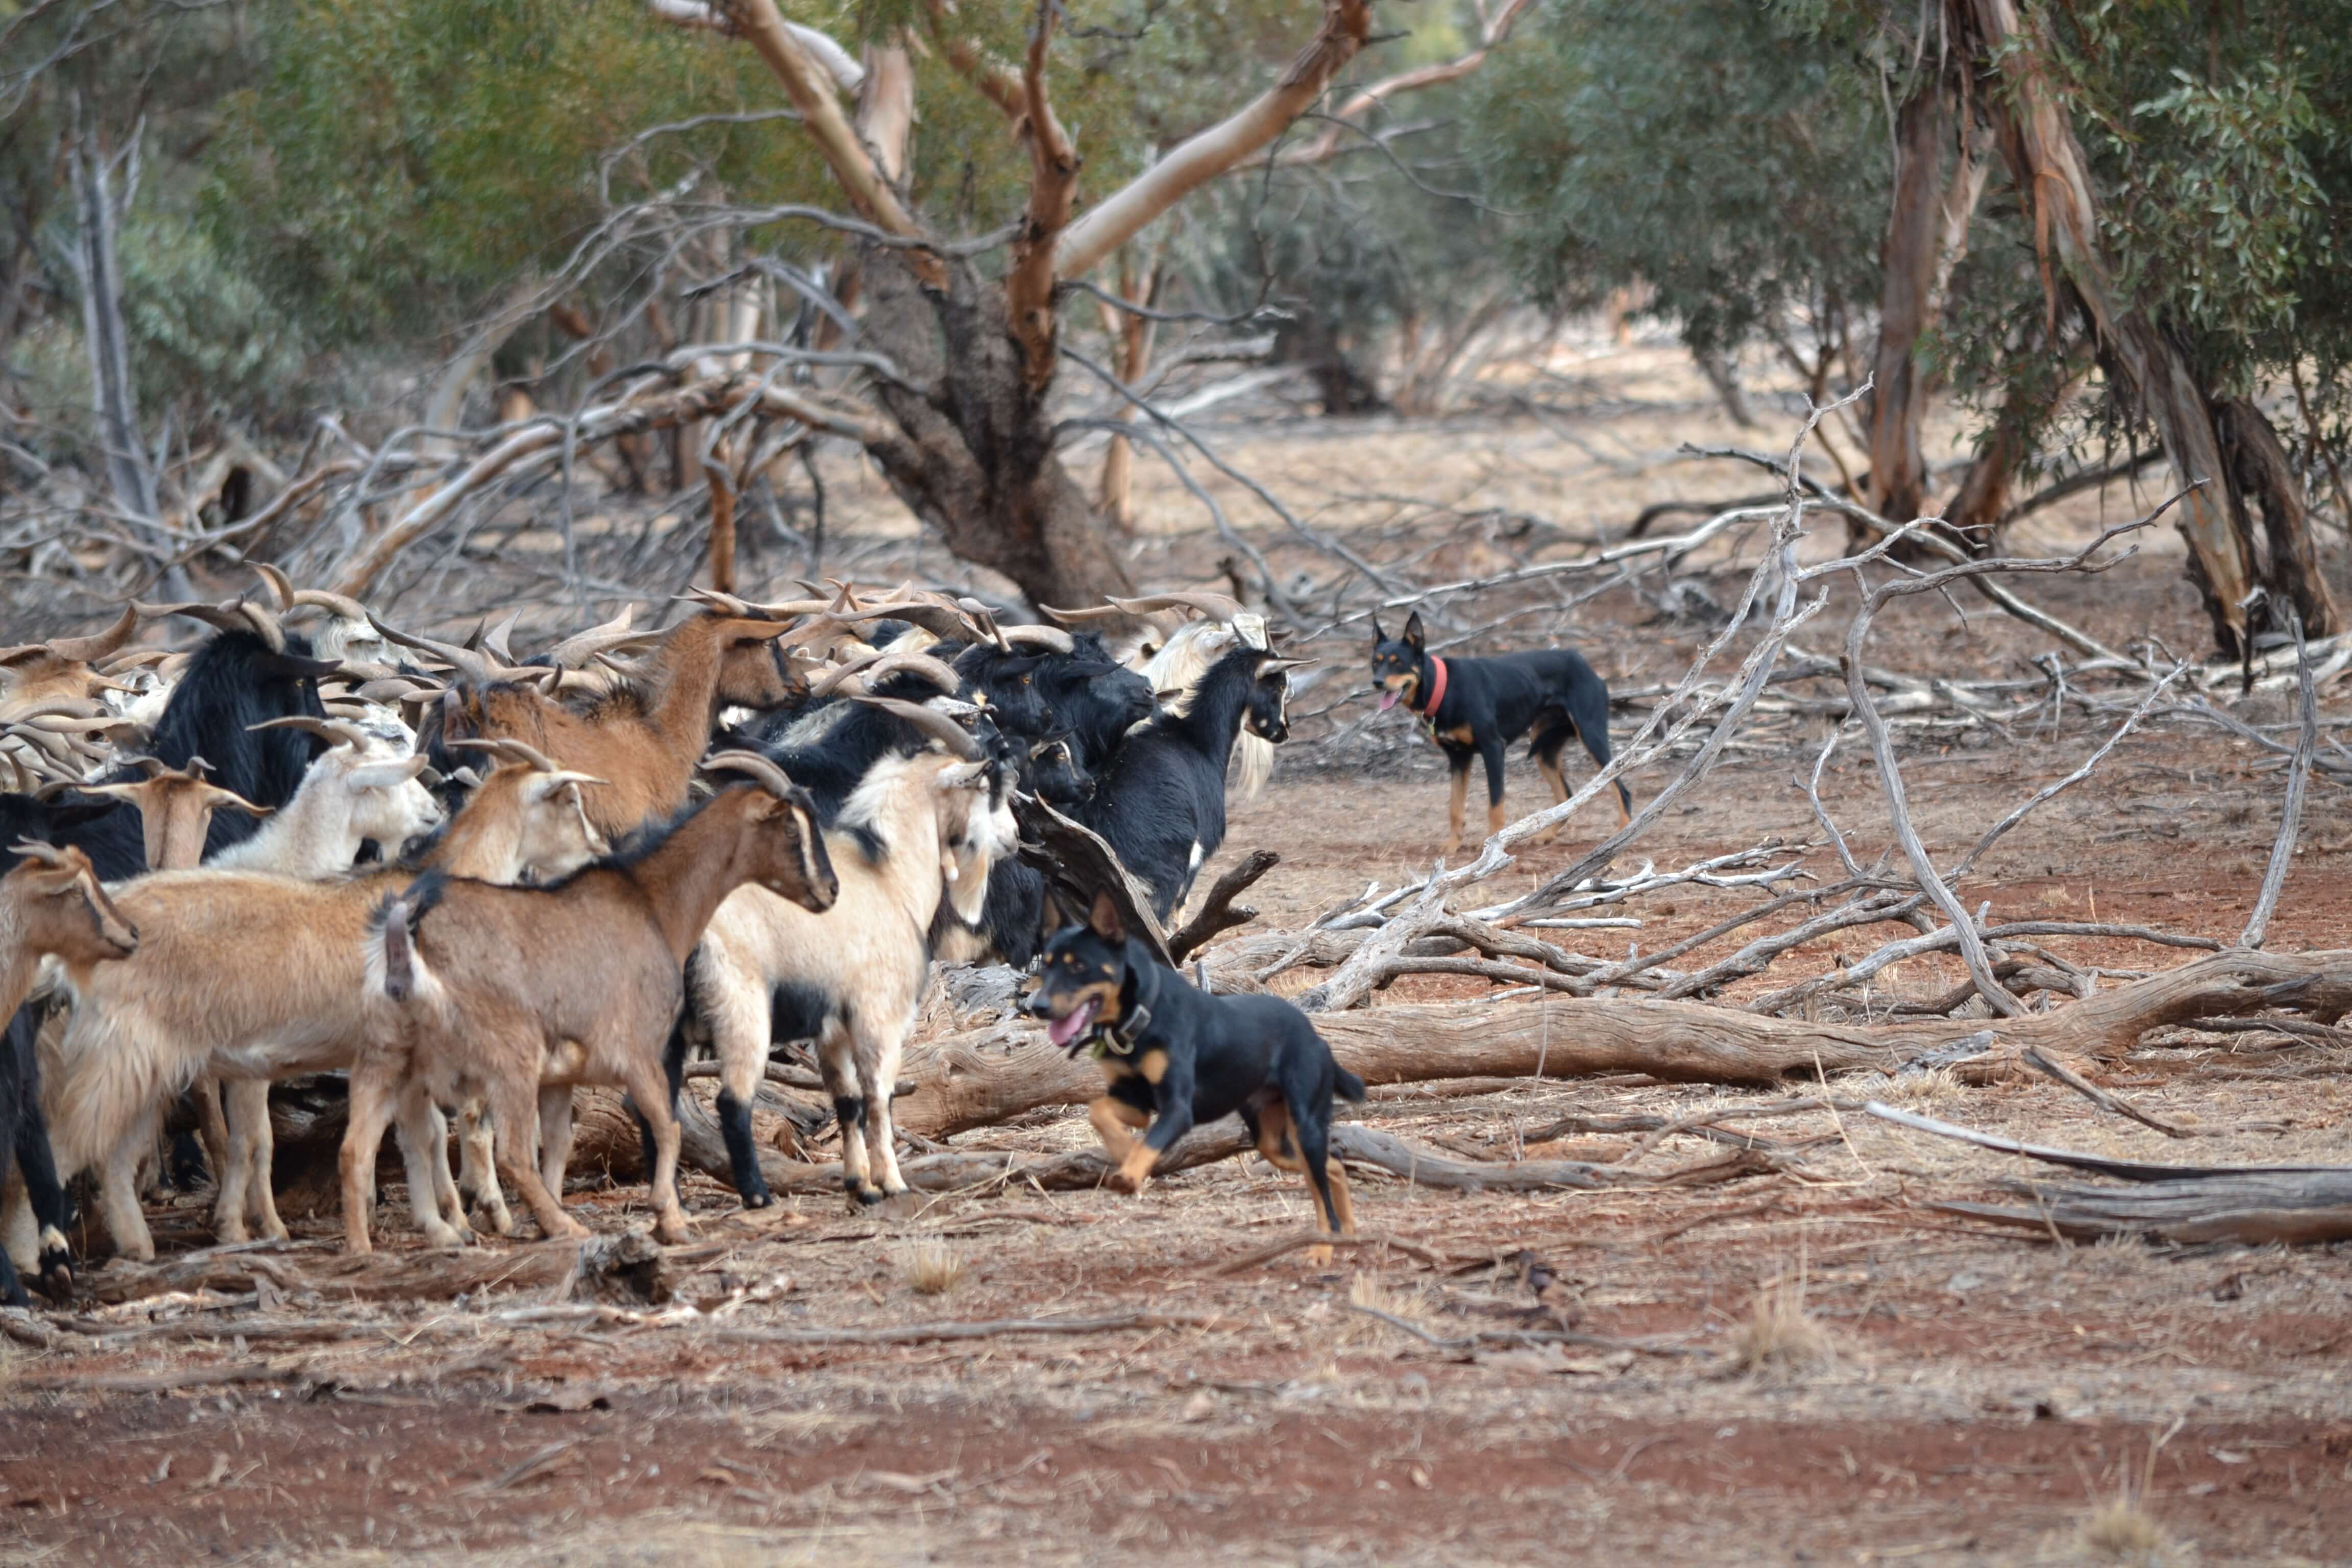 Herd of goats being rounded up (mustered) by working dogs